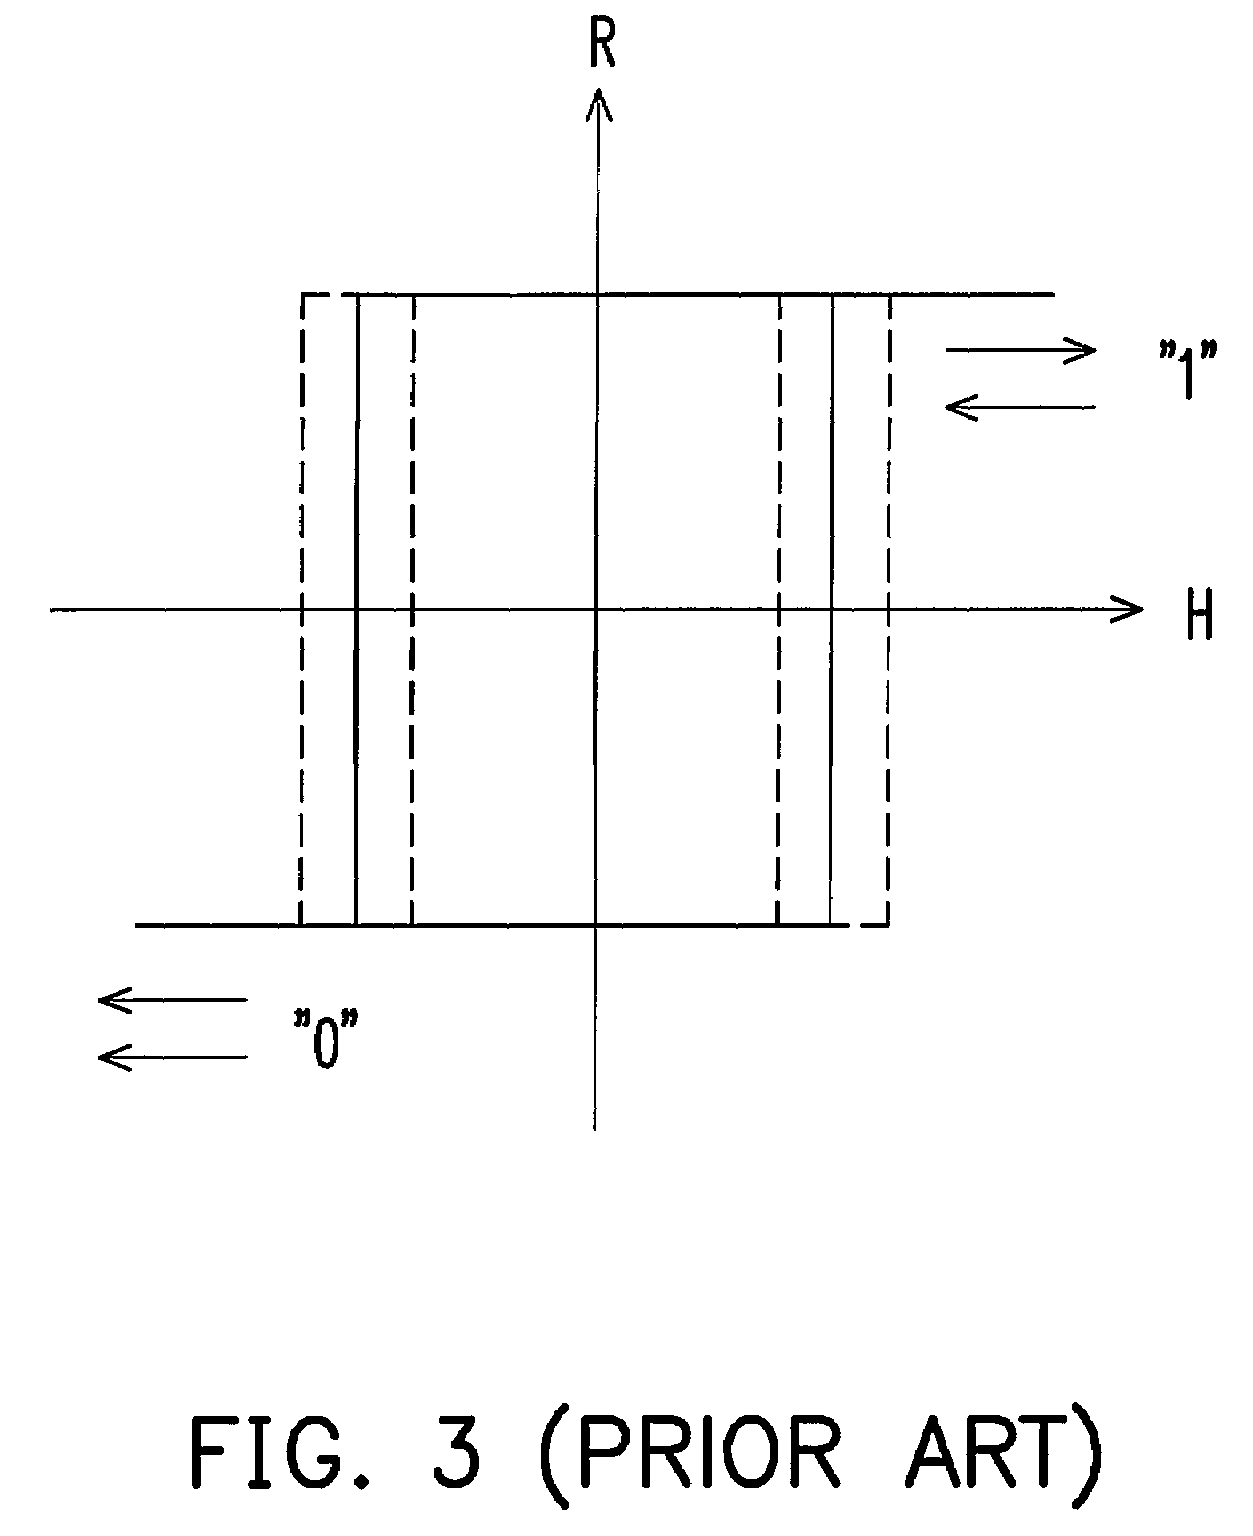 Structure and access method for magnetic memory cell and circuit of magnetic memory